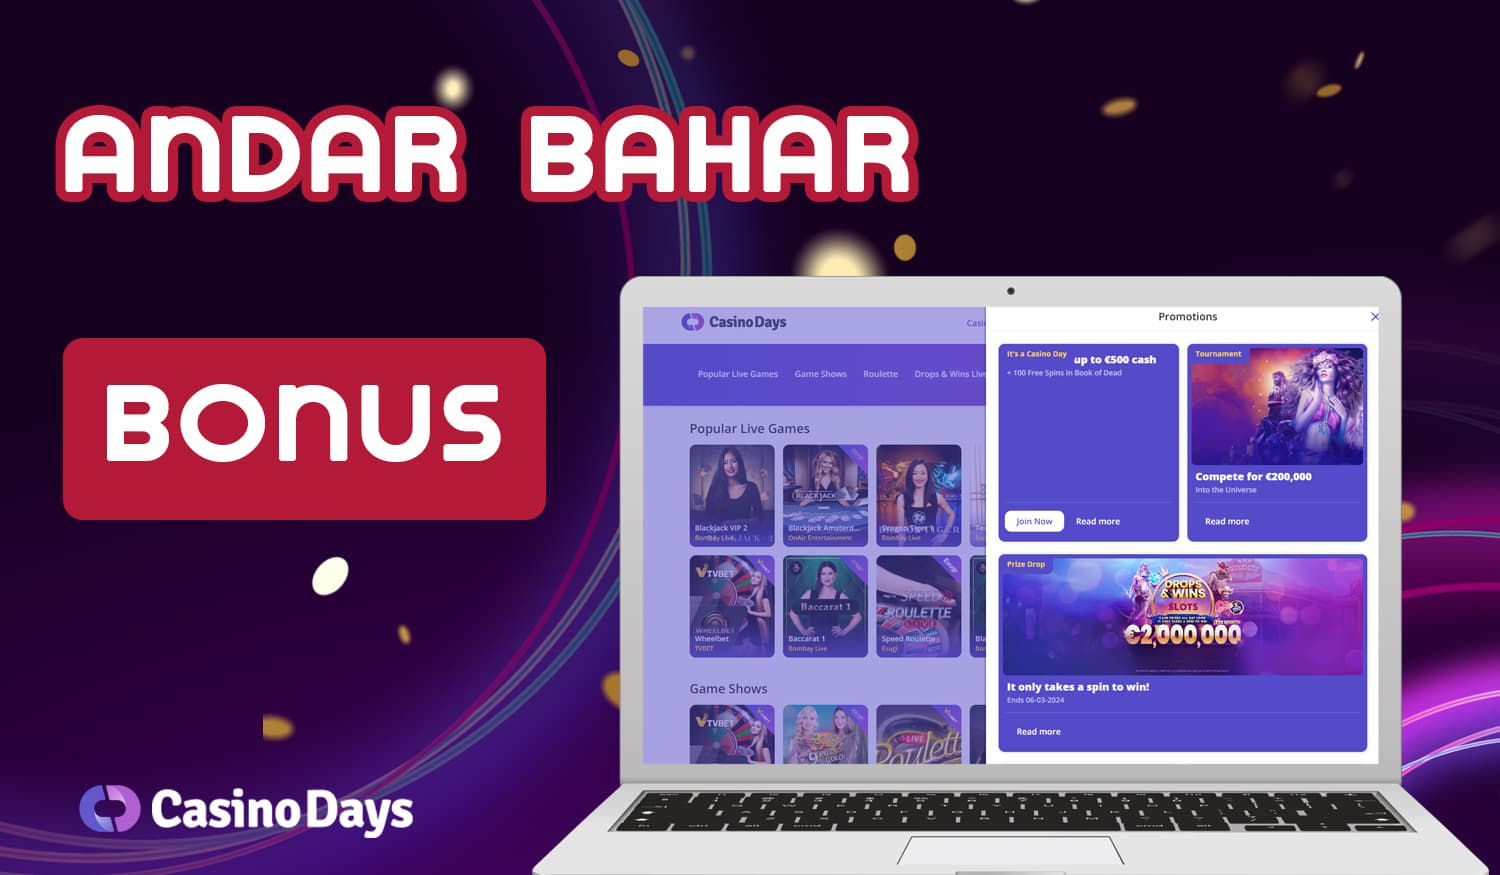 How to get and use bonuses at Casino Days playing Andar Bahar